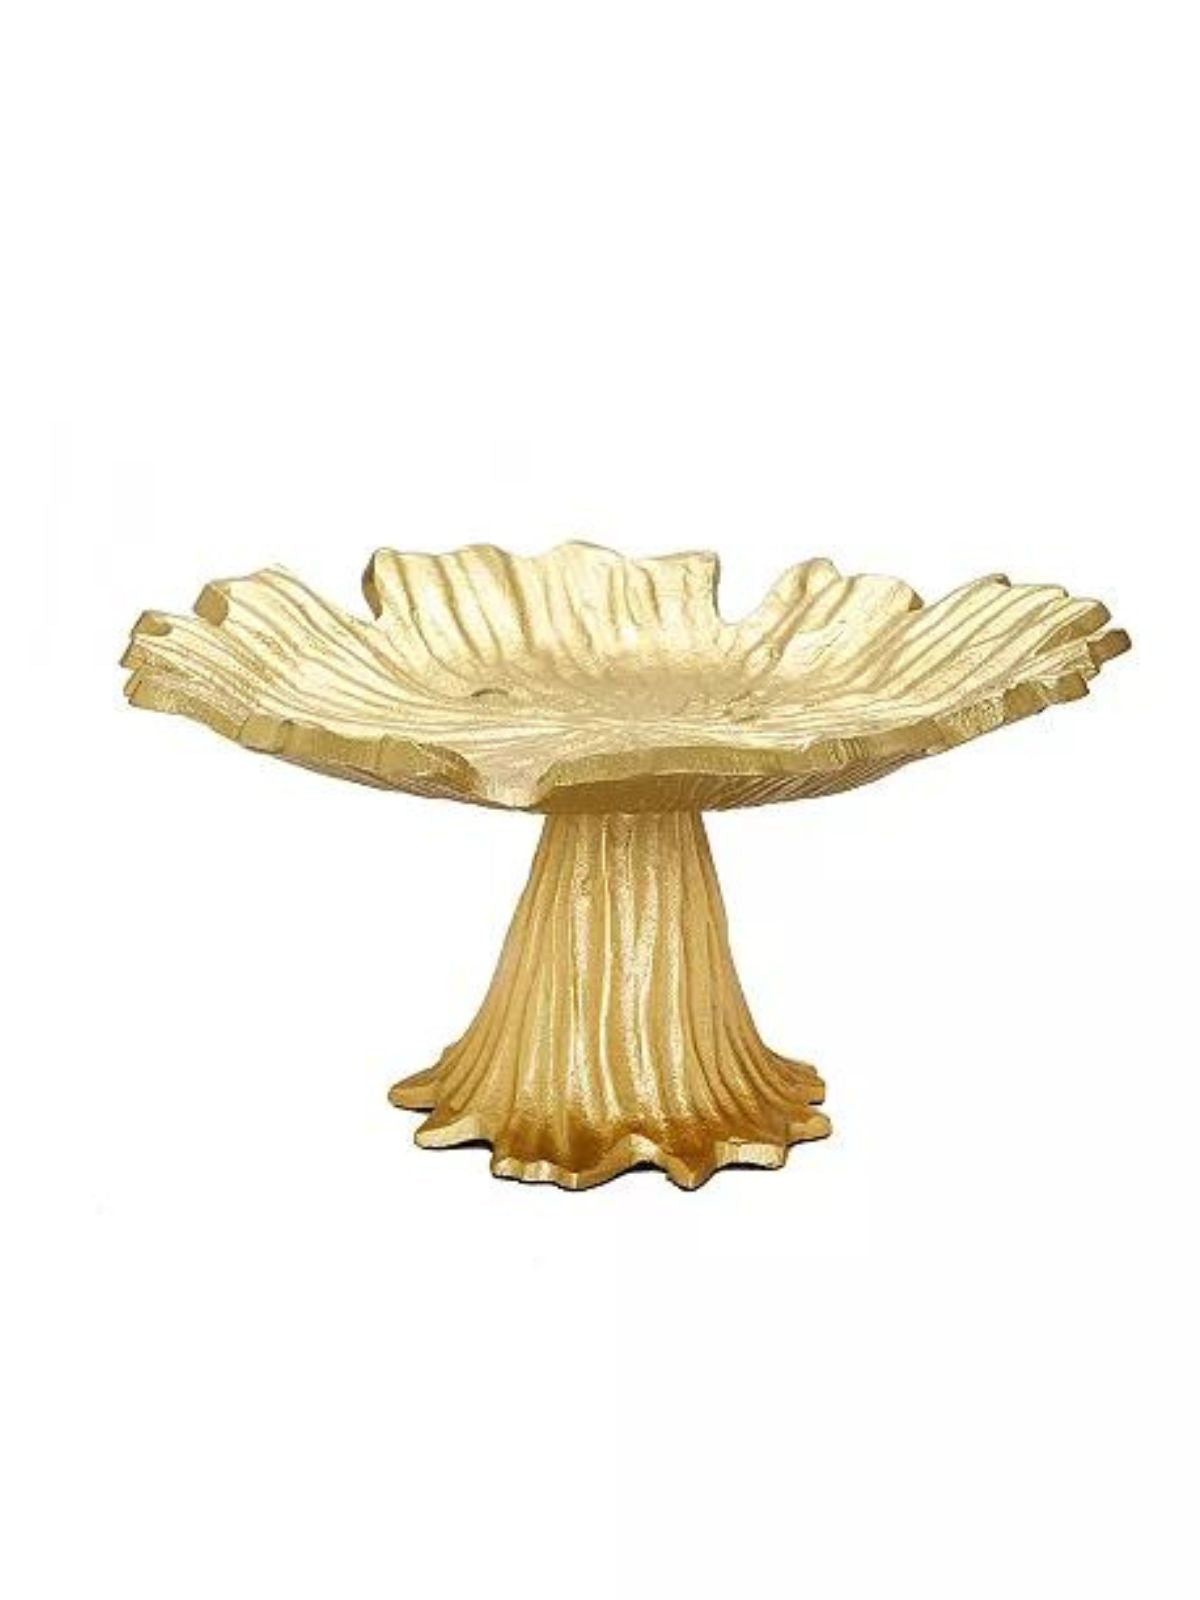 Stainless Steel Gold Flower Footed Cake Plate sold by KYA Home Decor. 